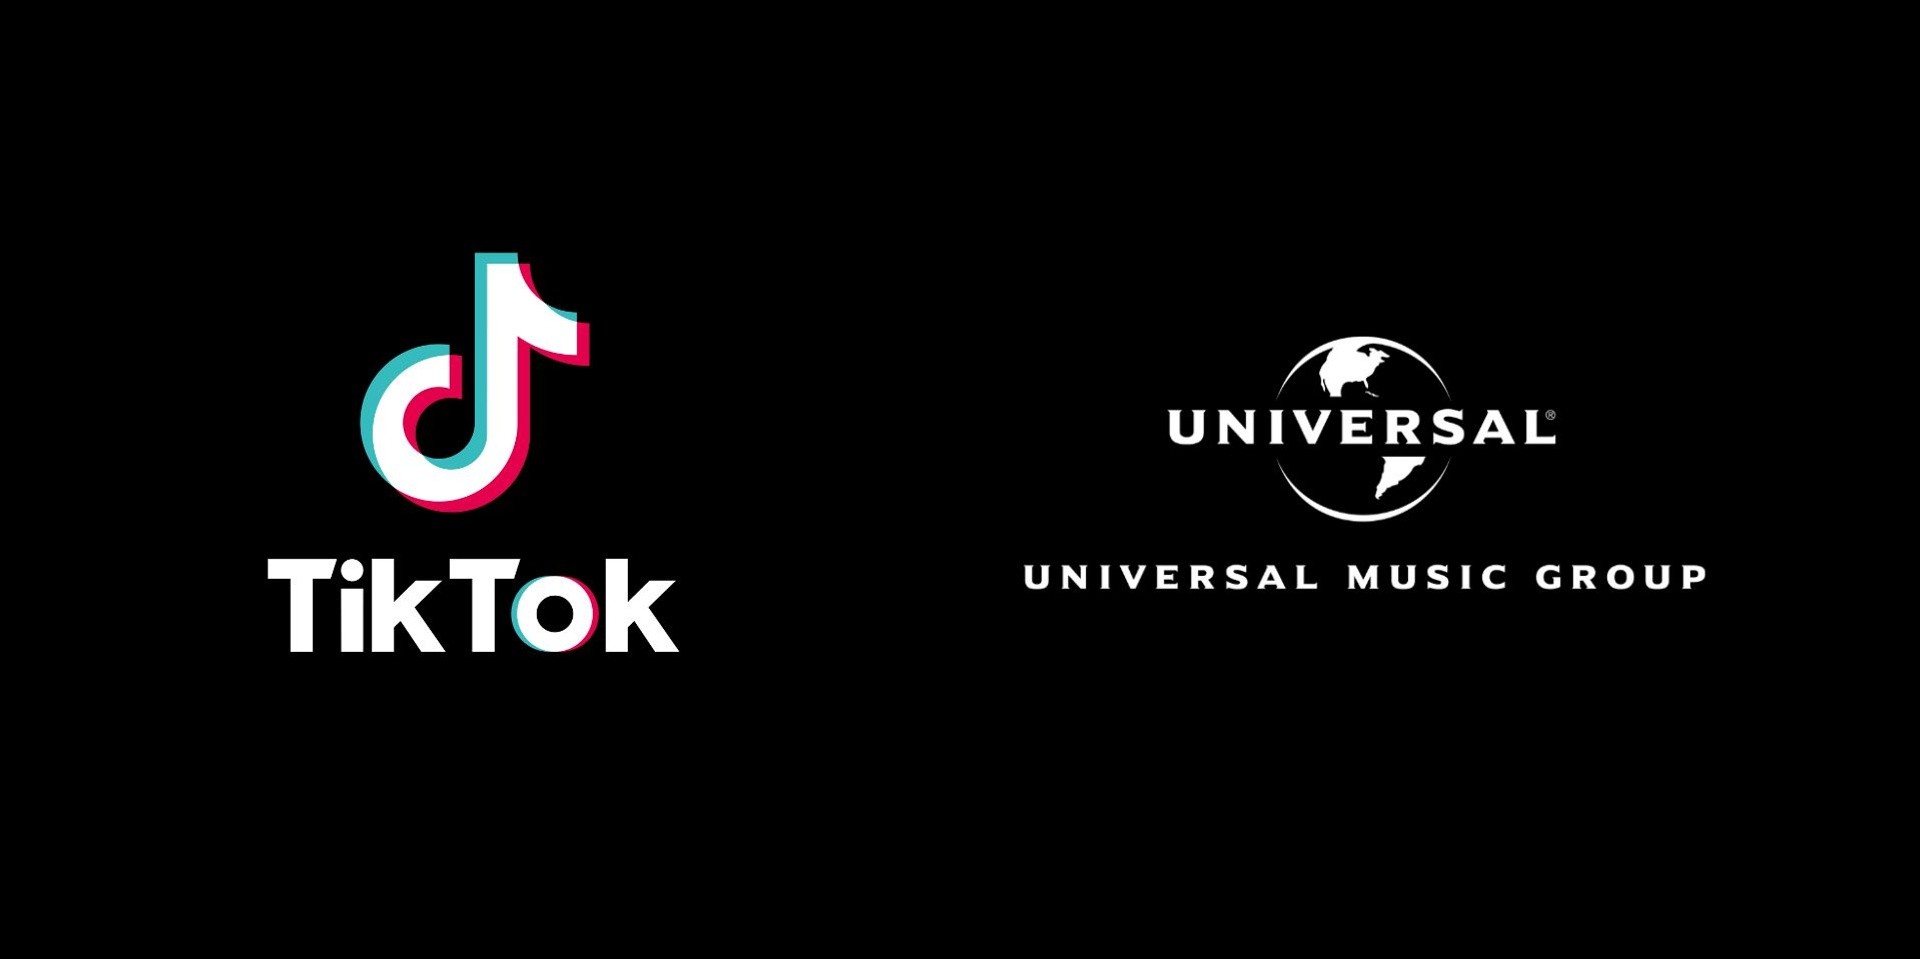 Universal Music Group Warns It Will Pull Songs From TikTok After Deal Expiration